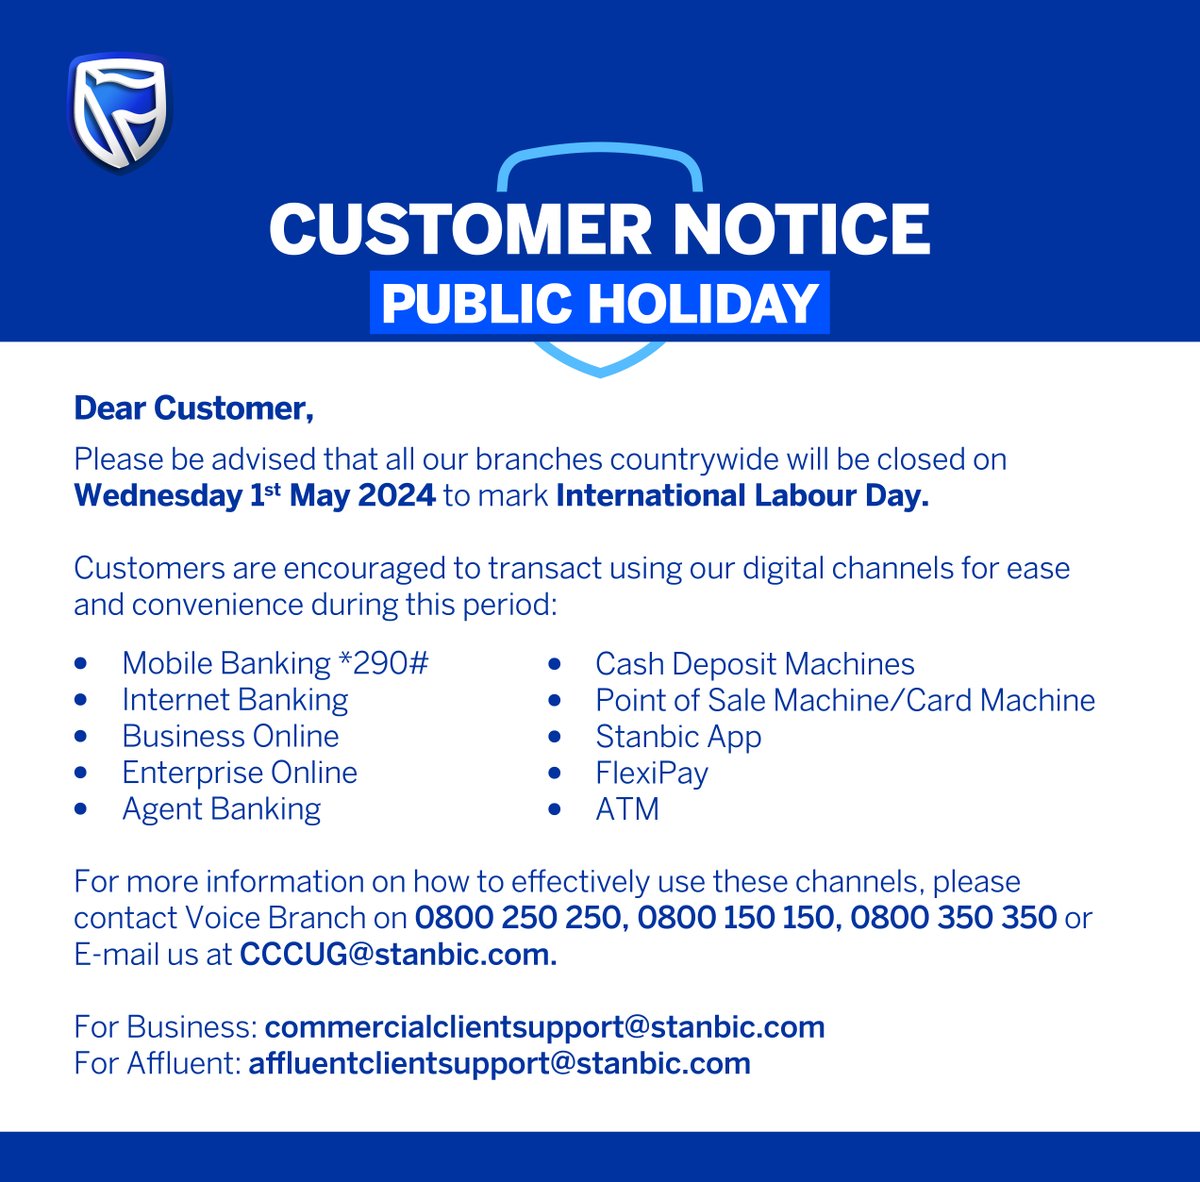 #PublicNotice: Tomorrow,our branches will be closed in observance of International Labour Day. However, customers can still transact using our alternative channels.